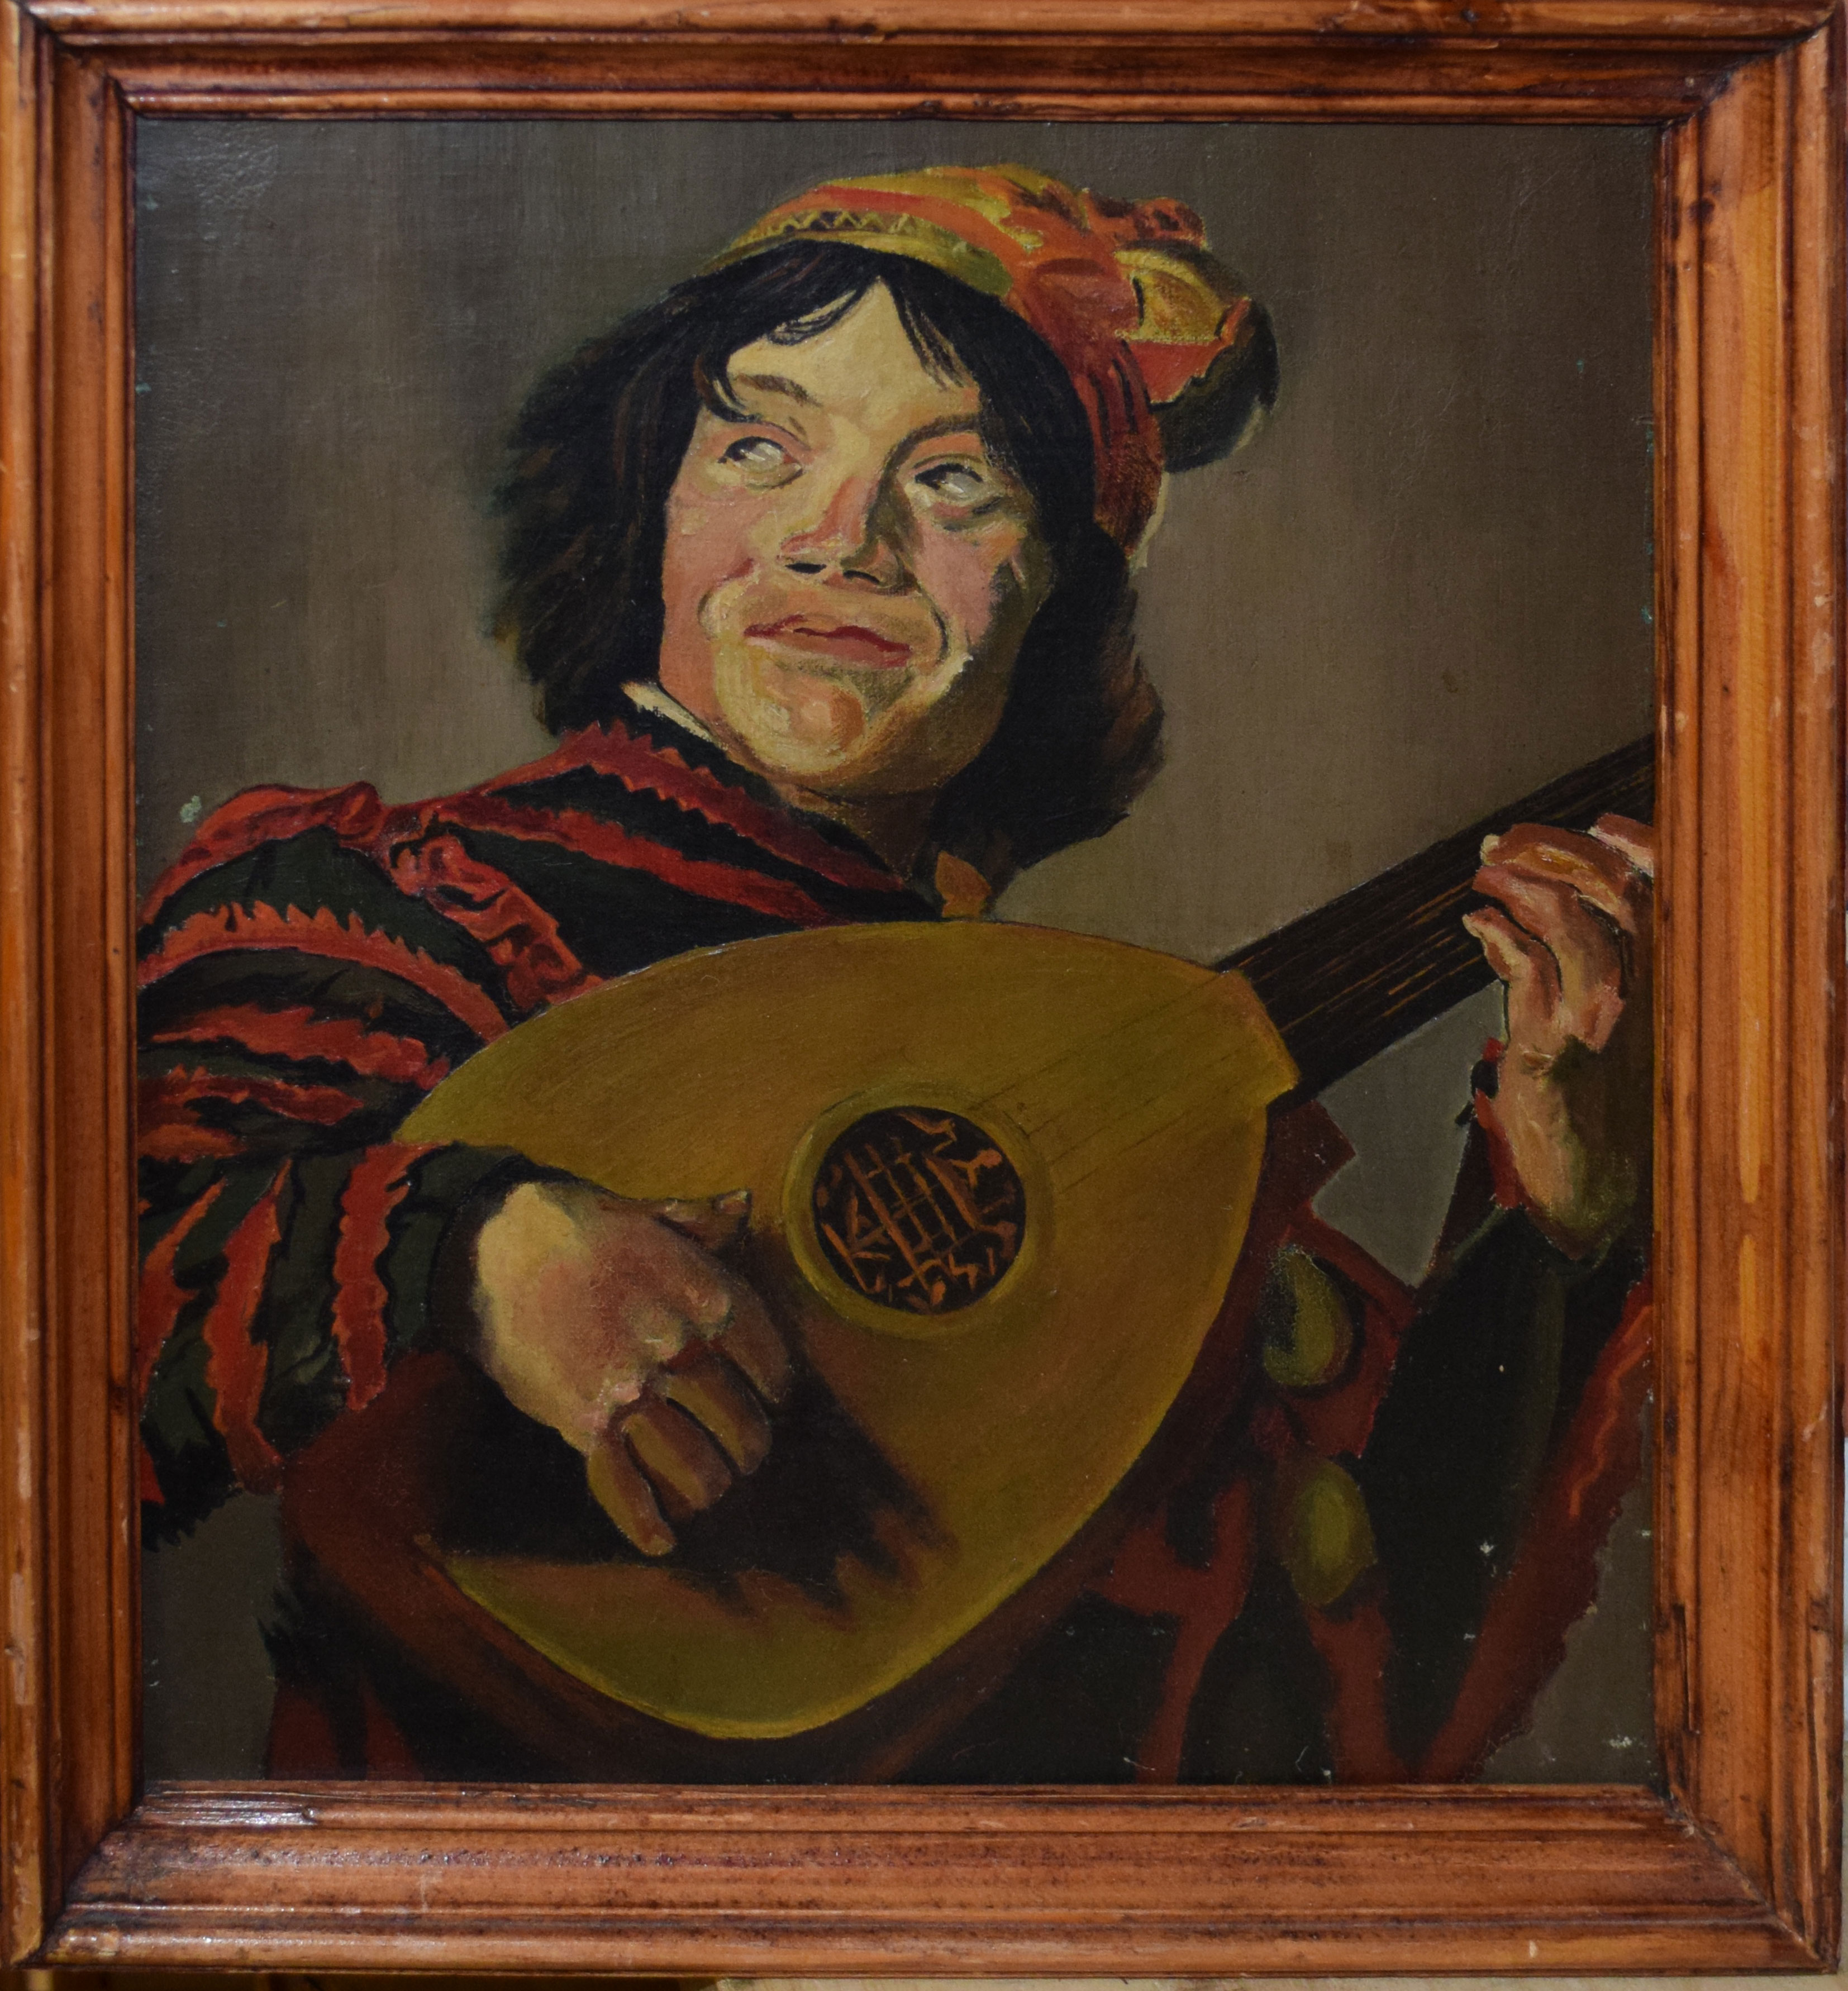 B A Schaap, Figure playing mandolin, oil on canvas, signed verso, 30 x 27cm